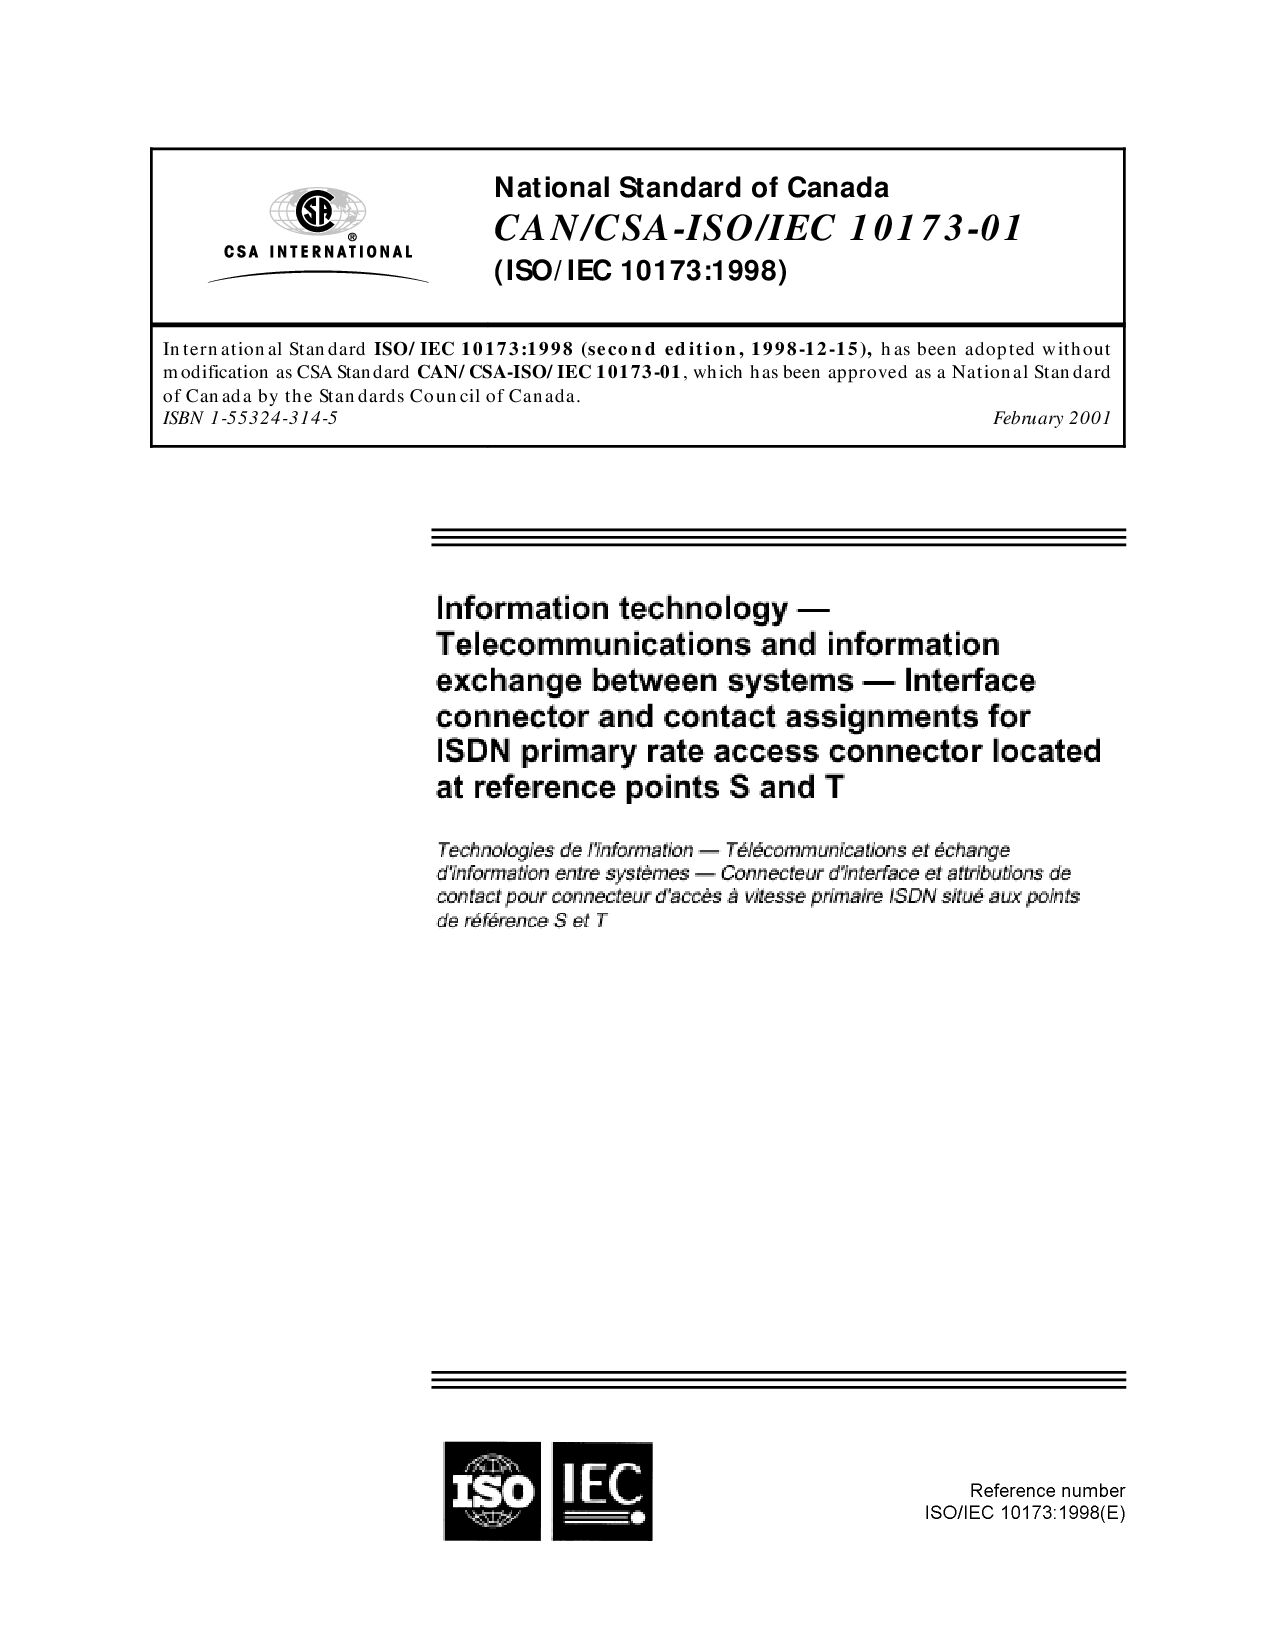 CAN/CSA-ISO/IEC 10173:2001